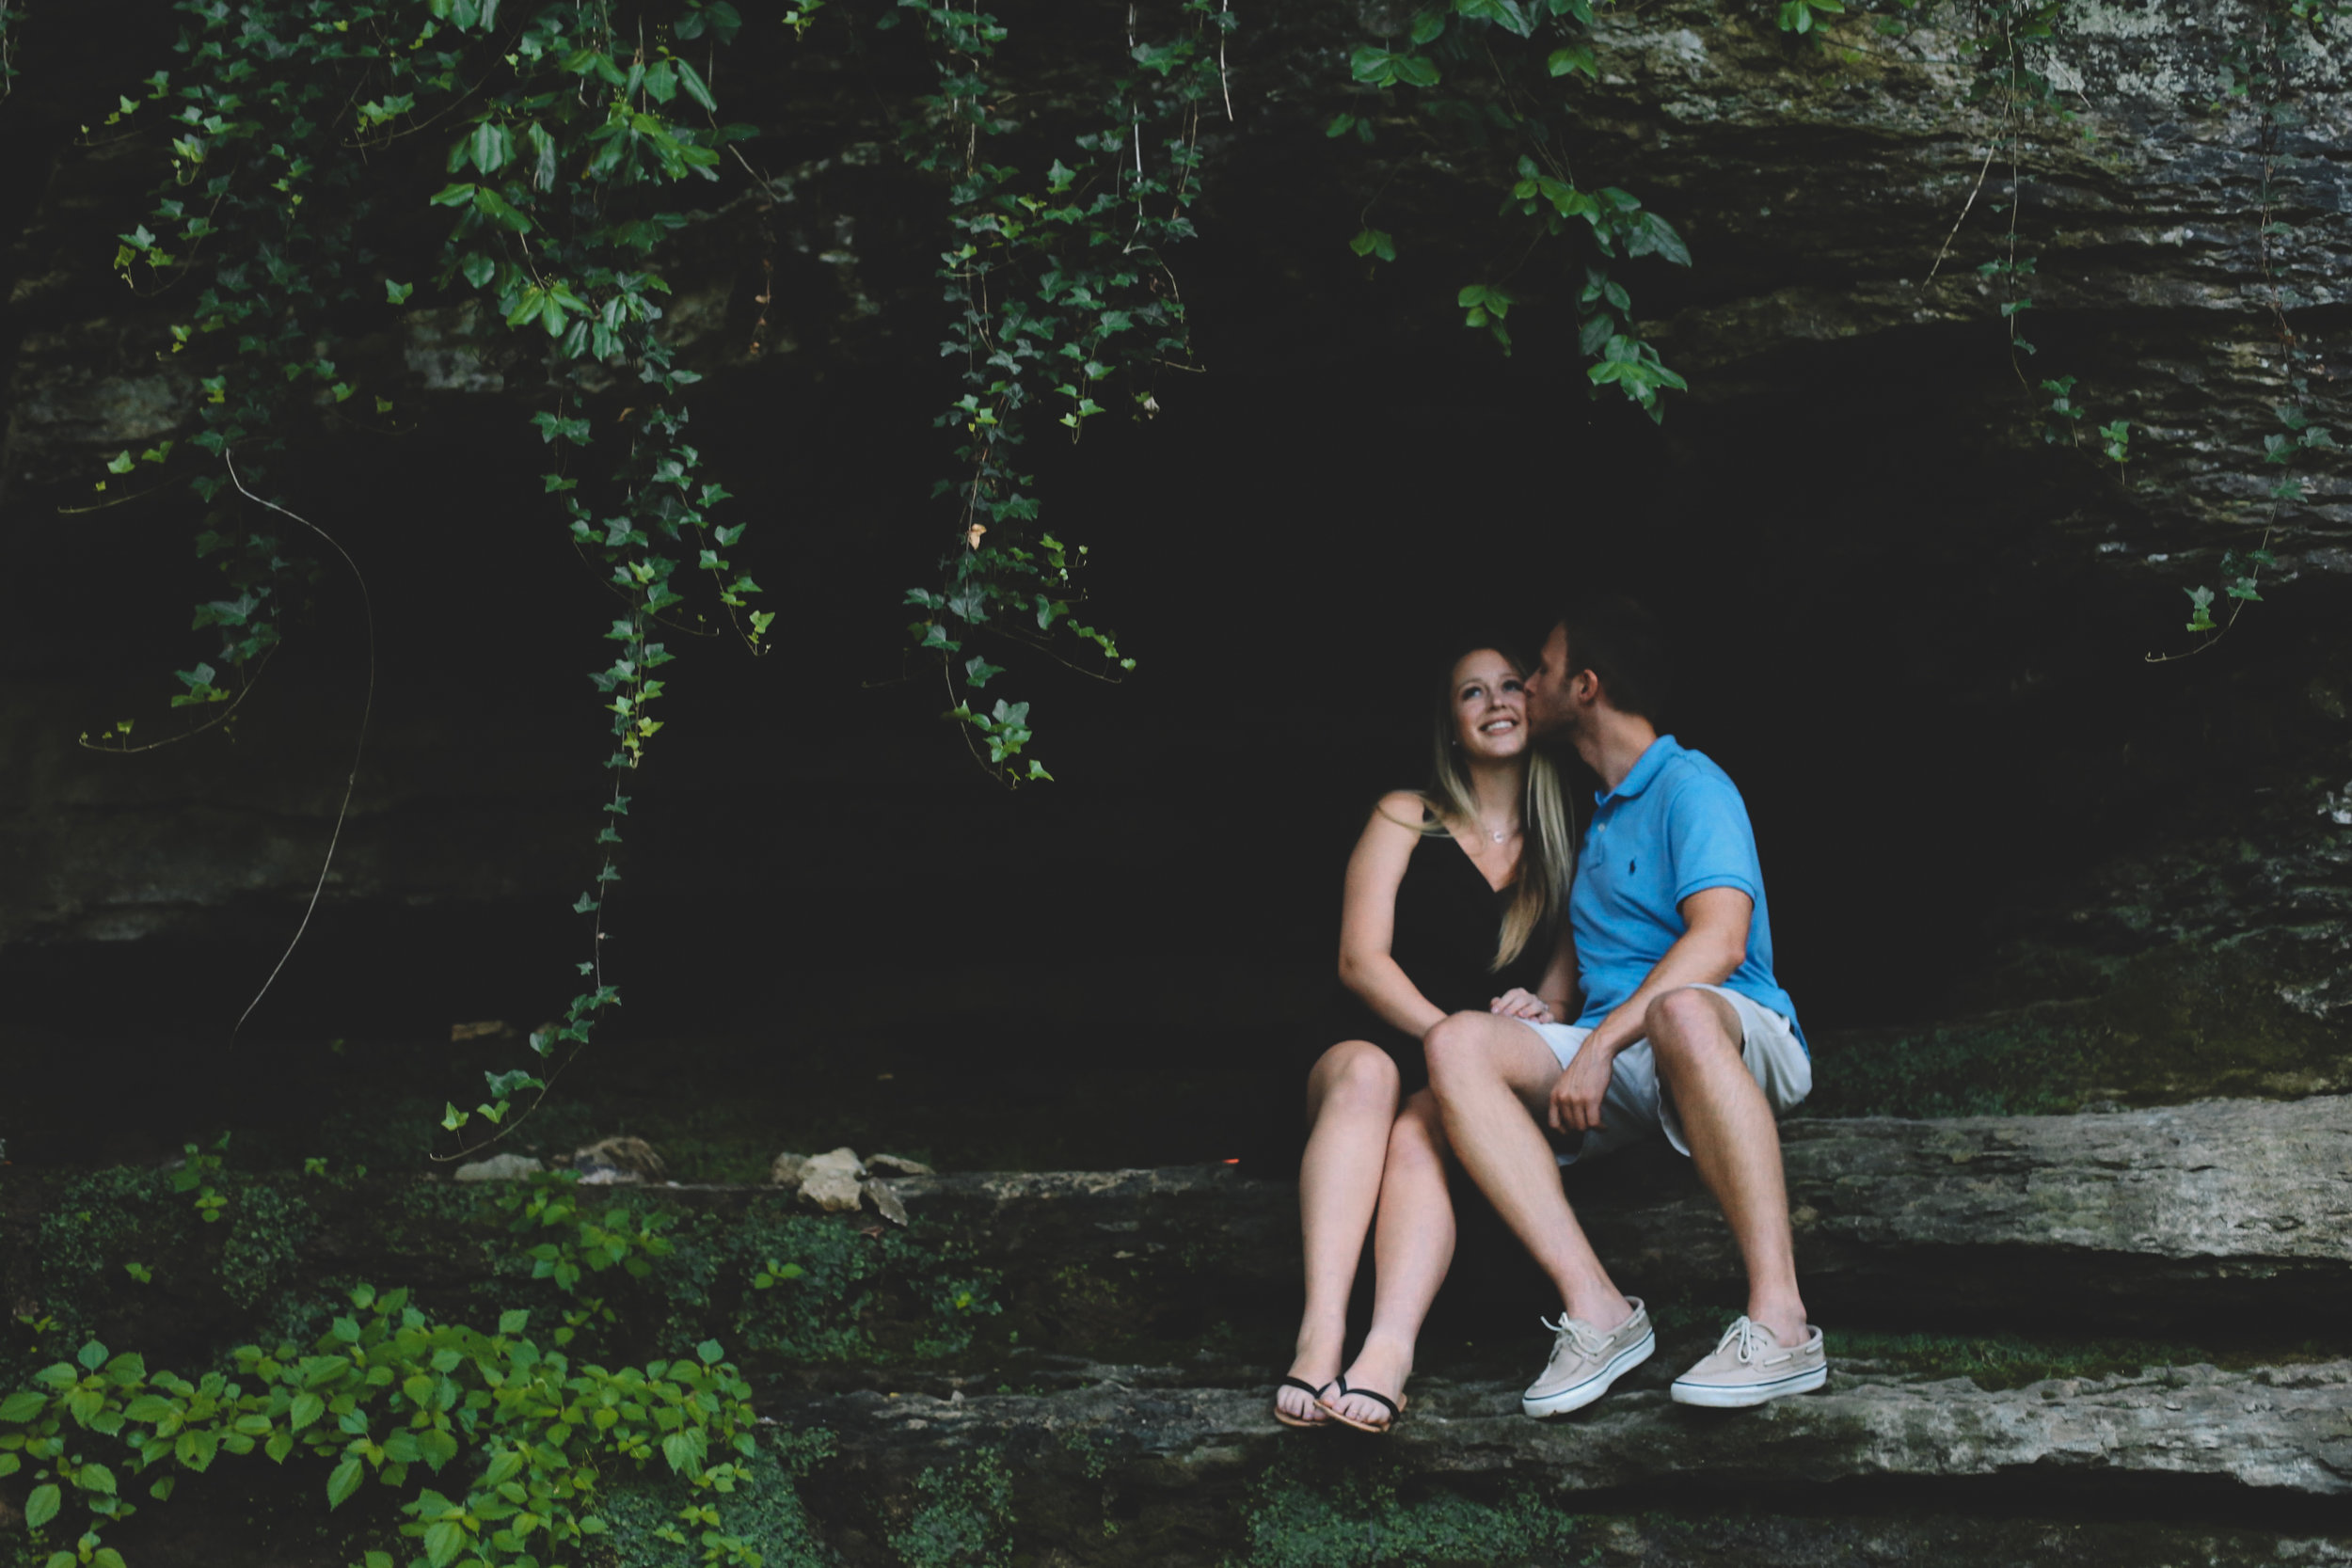 Elizabeth + Mitch Engagement Photo Session - Cherokee Park - Louisville, KY - Again We Say Rejoice Photography (24 of 173).jpg